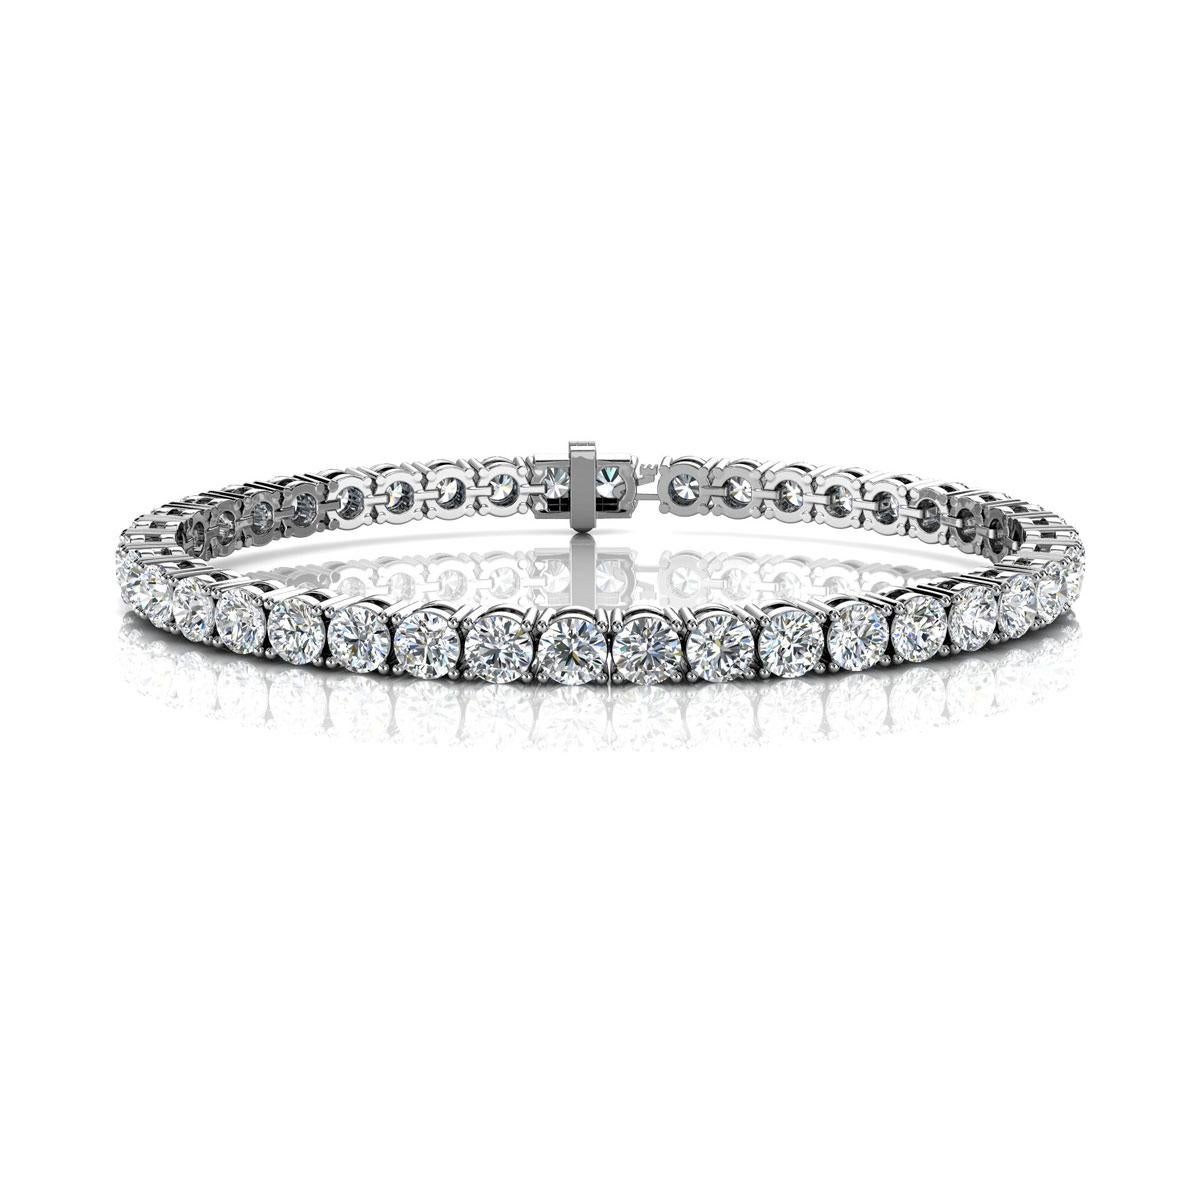 A timeless four prongs diamonds tennis bracelet. Experience the Difference!

Product details: 

Center Gemstone Type: NATURAL DIAMOND
Center Gemstone Color: WHITE
Center Gemstone Shape: ROUND
Center Diamond Carat Weight: 10
Metal: 14K White